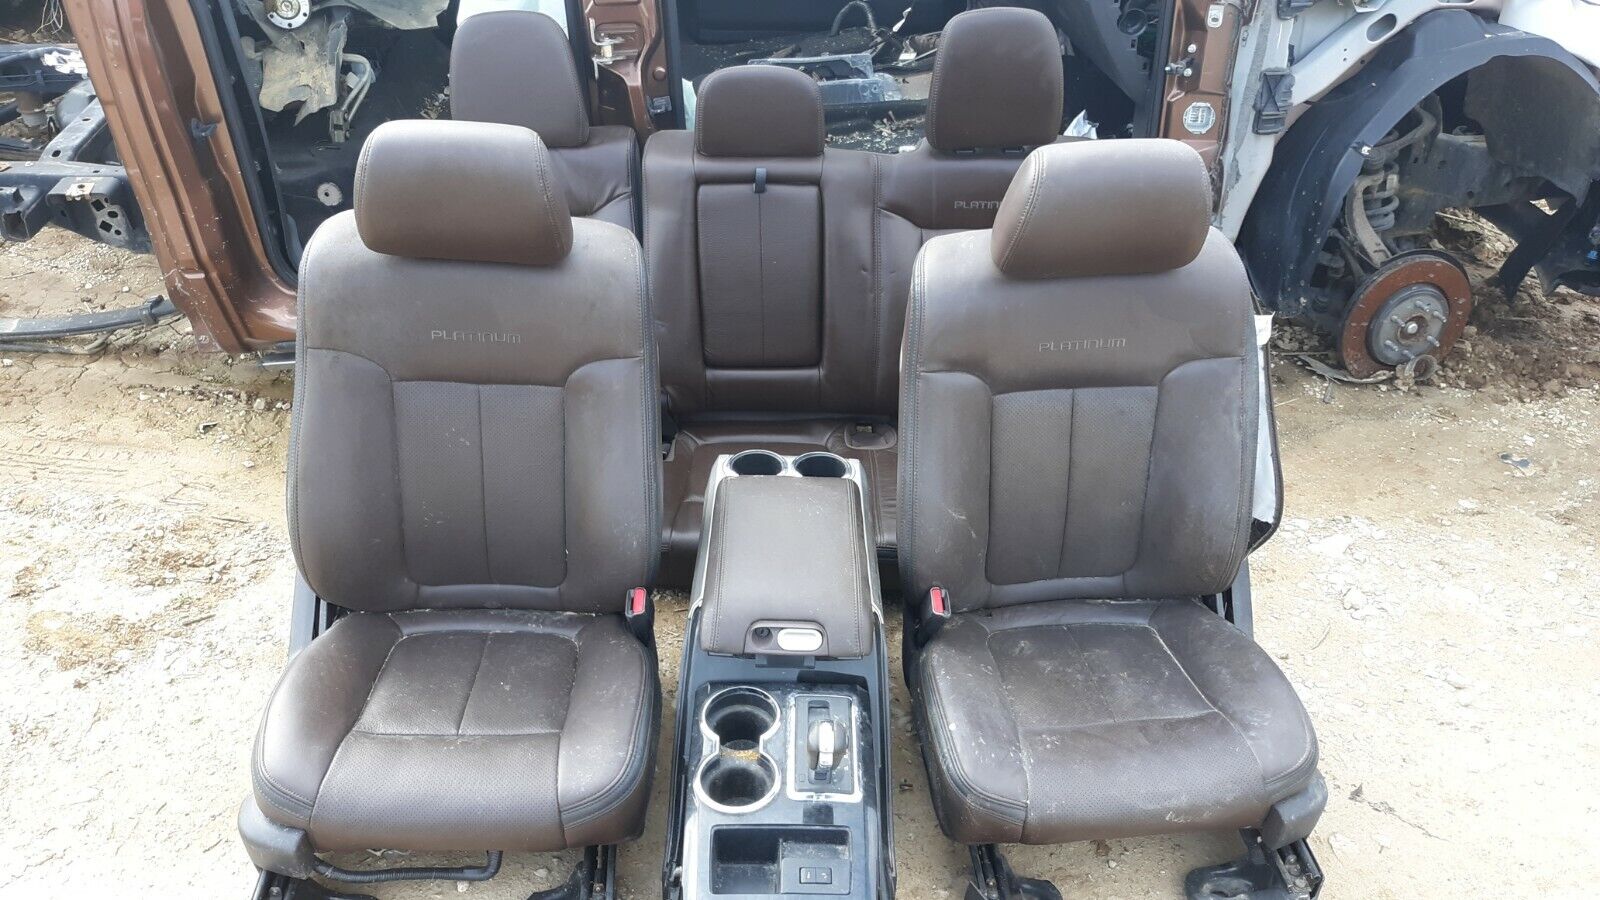 Used 2011 Ford F-150 Platinum Edition Brown Leather Seats & Center Console for Sale 2011 Ford F150 Power Seat Not Working